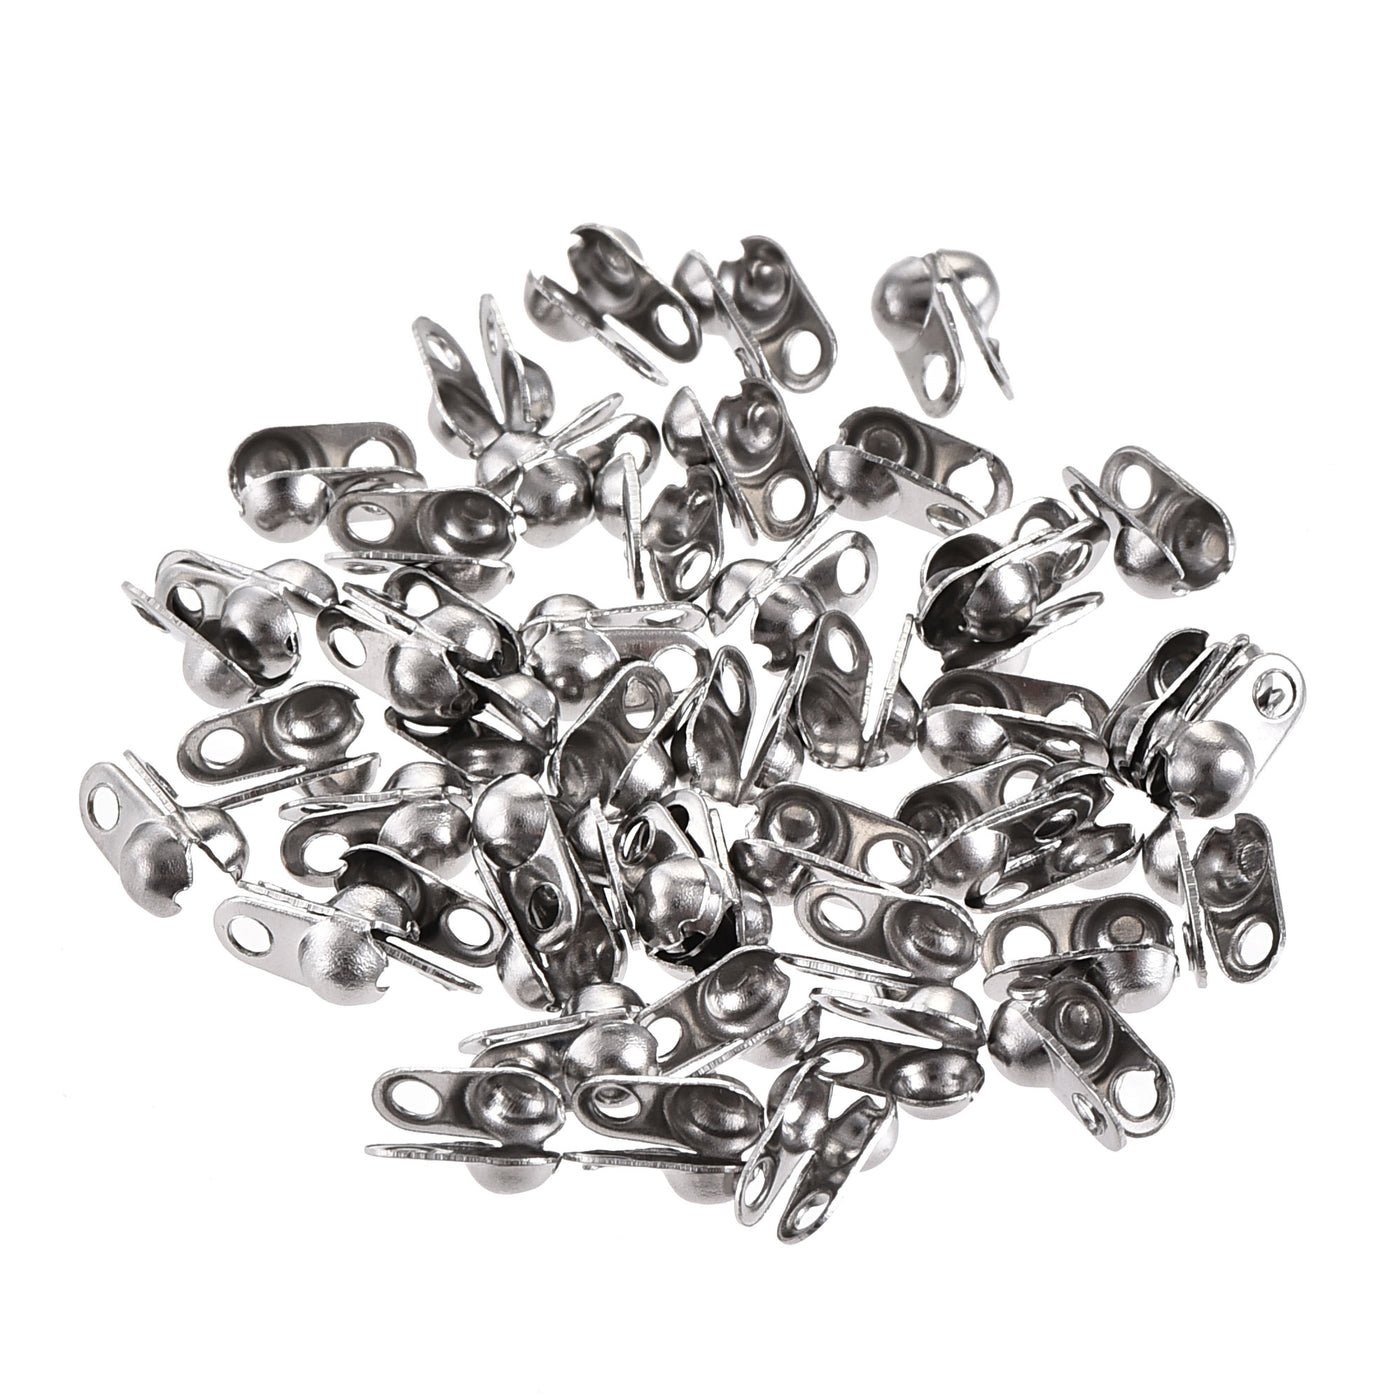 Uxcell Uxcell Ball Chain Connector, 2.4mm Ball Tips Clamshell Style Crimp Link Stainless Steel Connection, Pack of 50